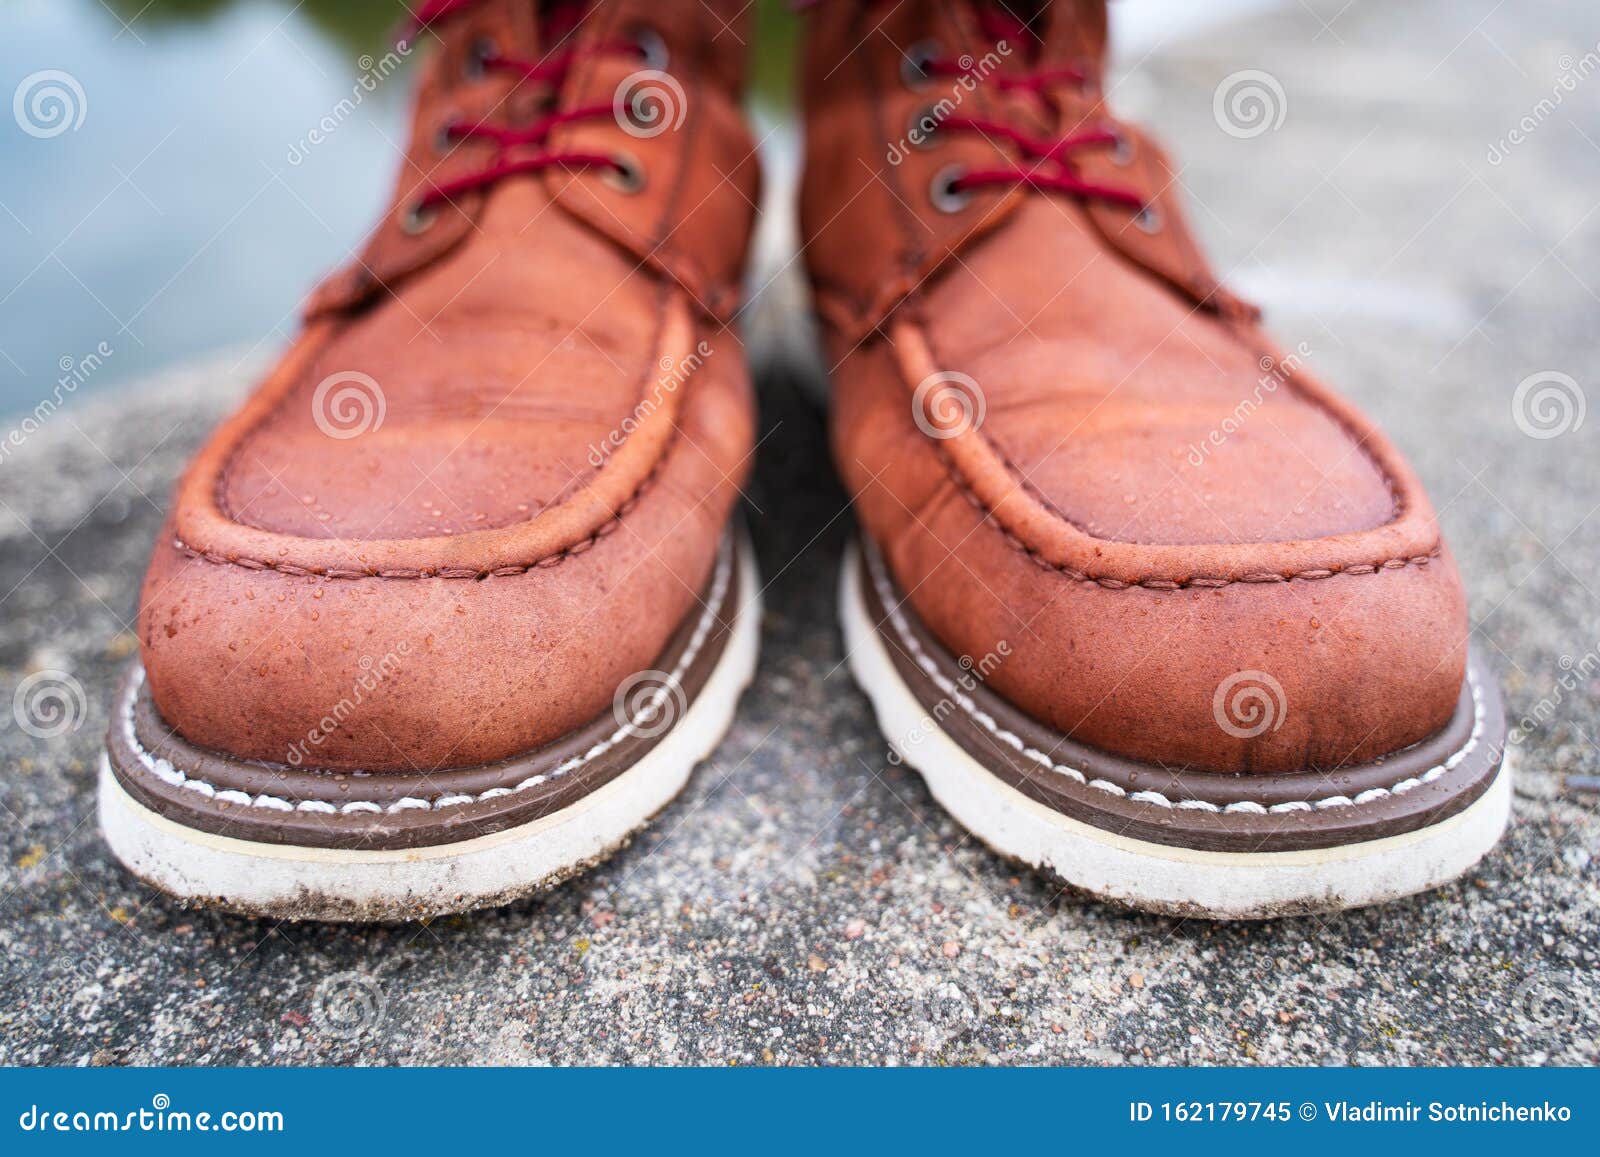 Water Drops on Red Leather Work Boots Close-up Stock Image - Image of ...